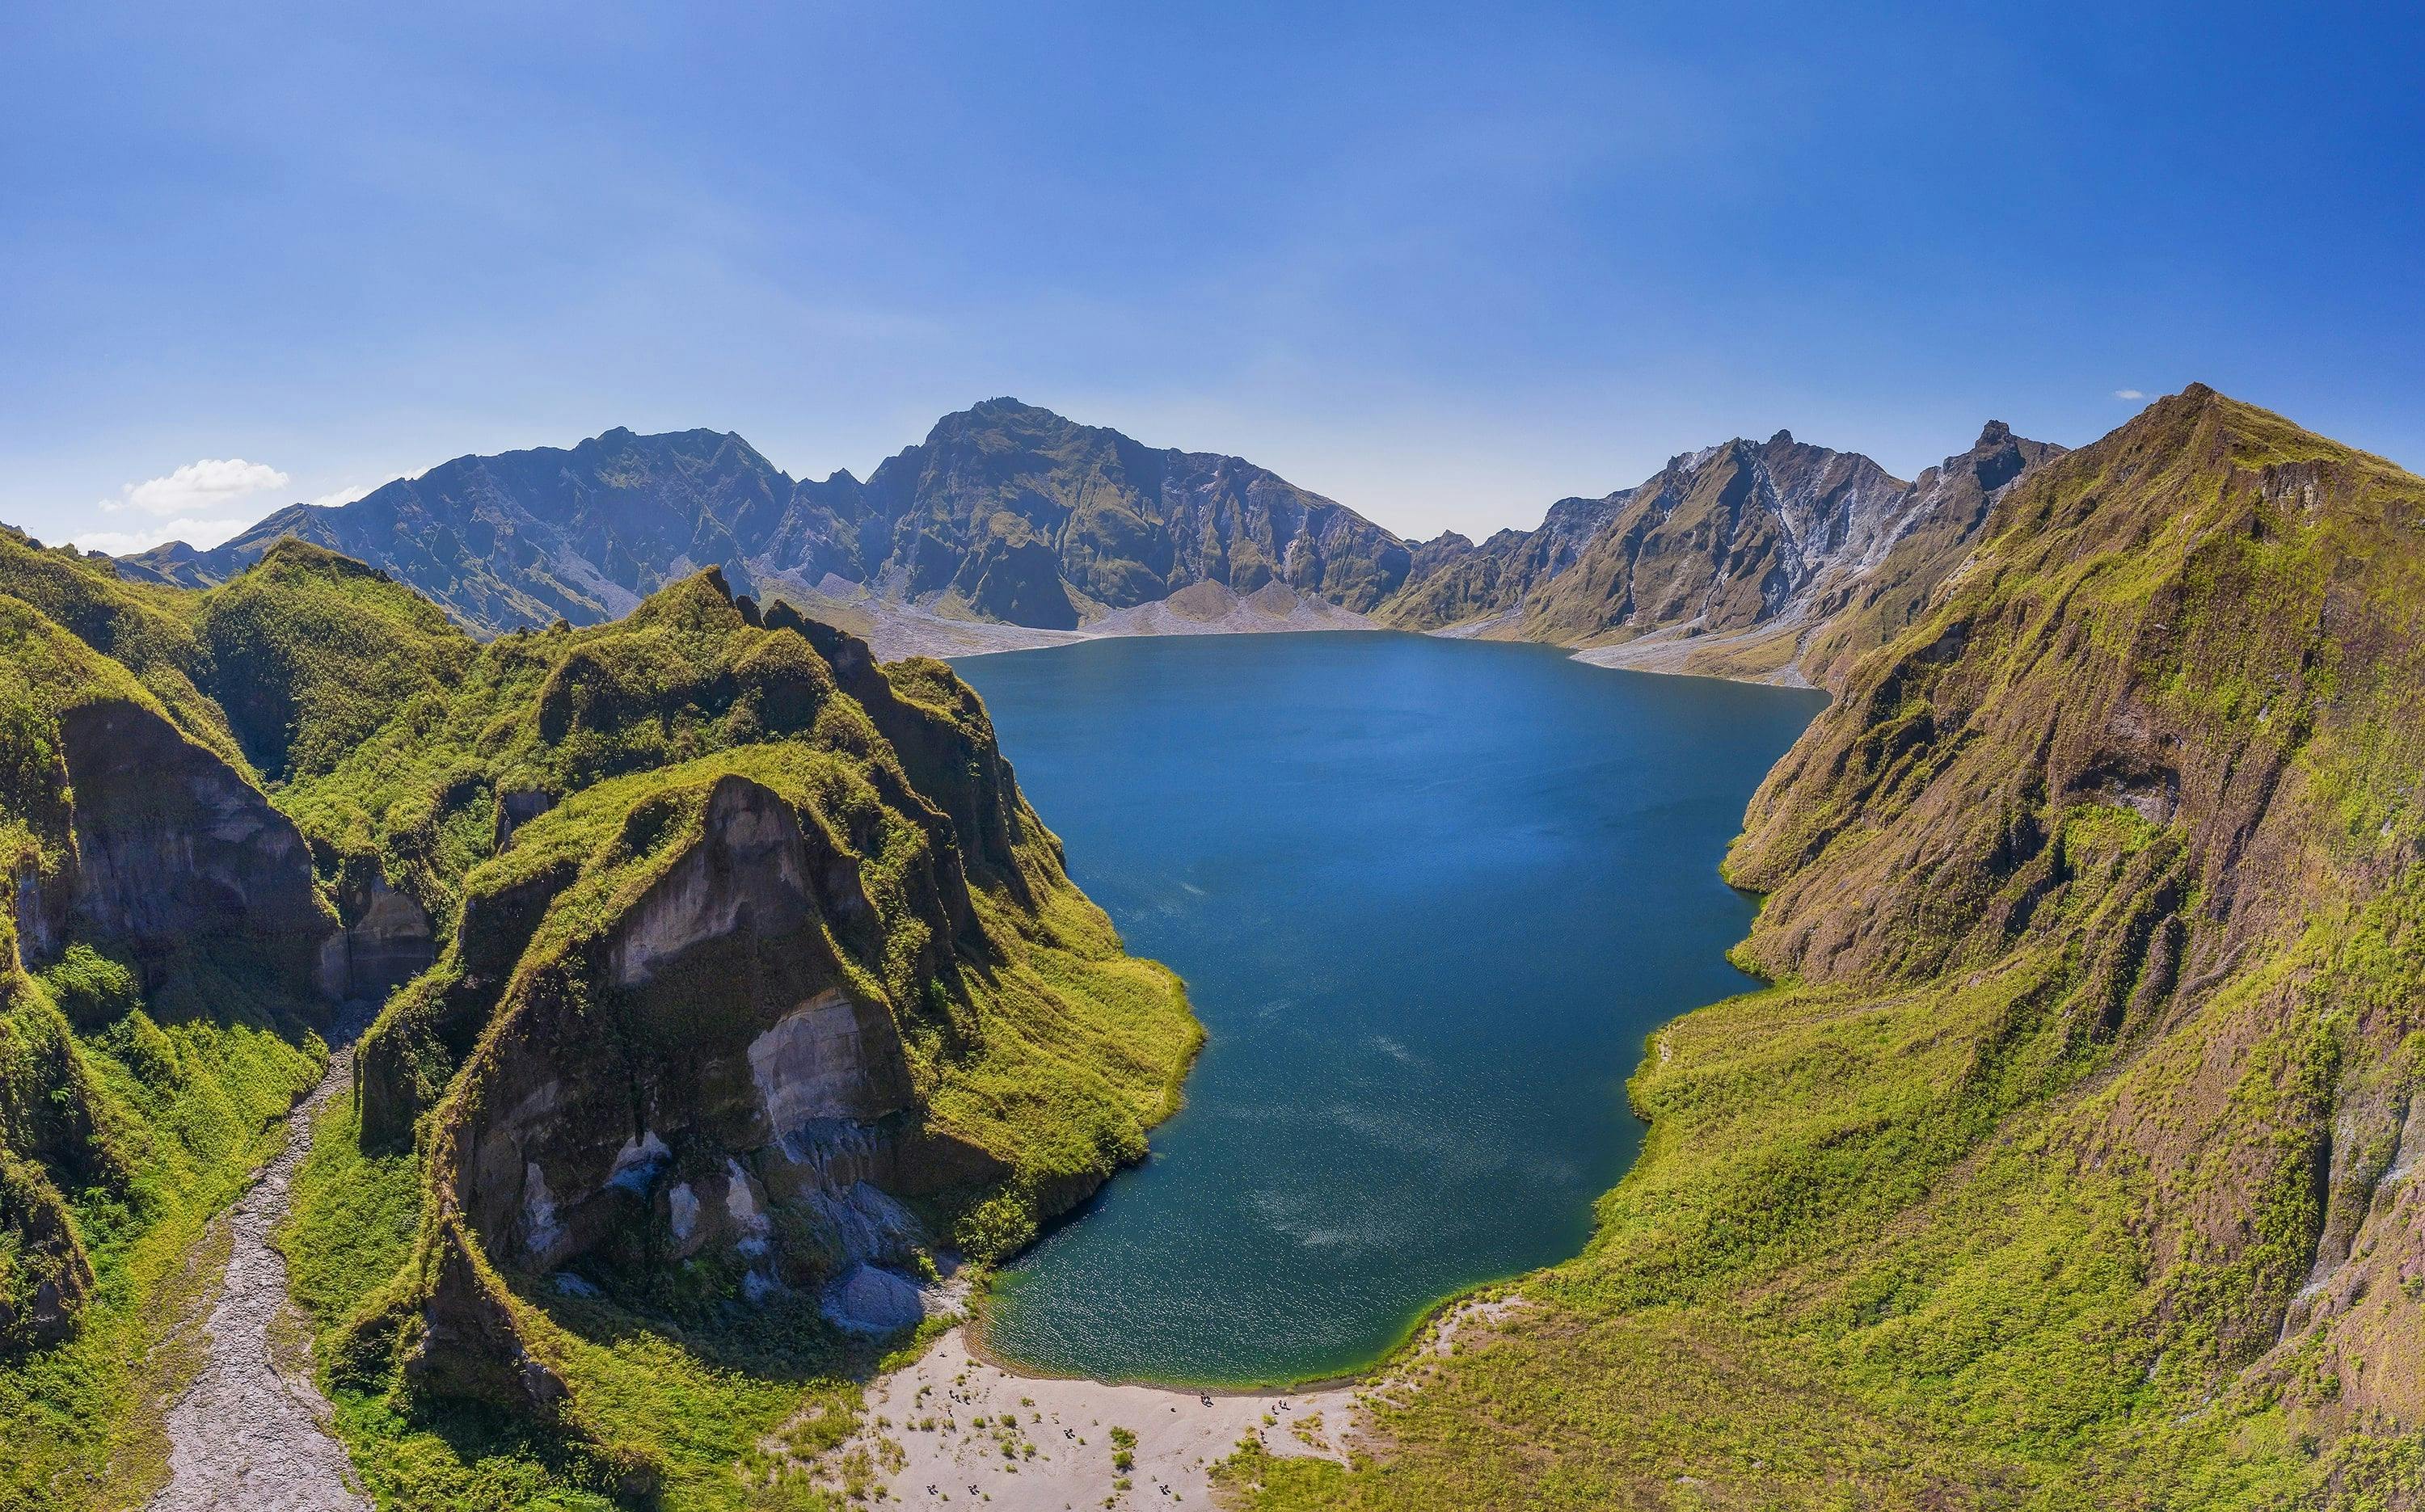 Breathtaking view of Mt. Pinatubo Crater Lake